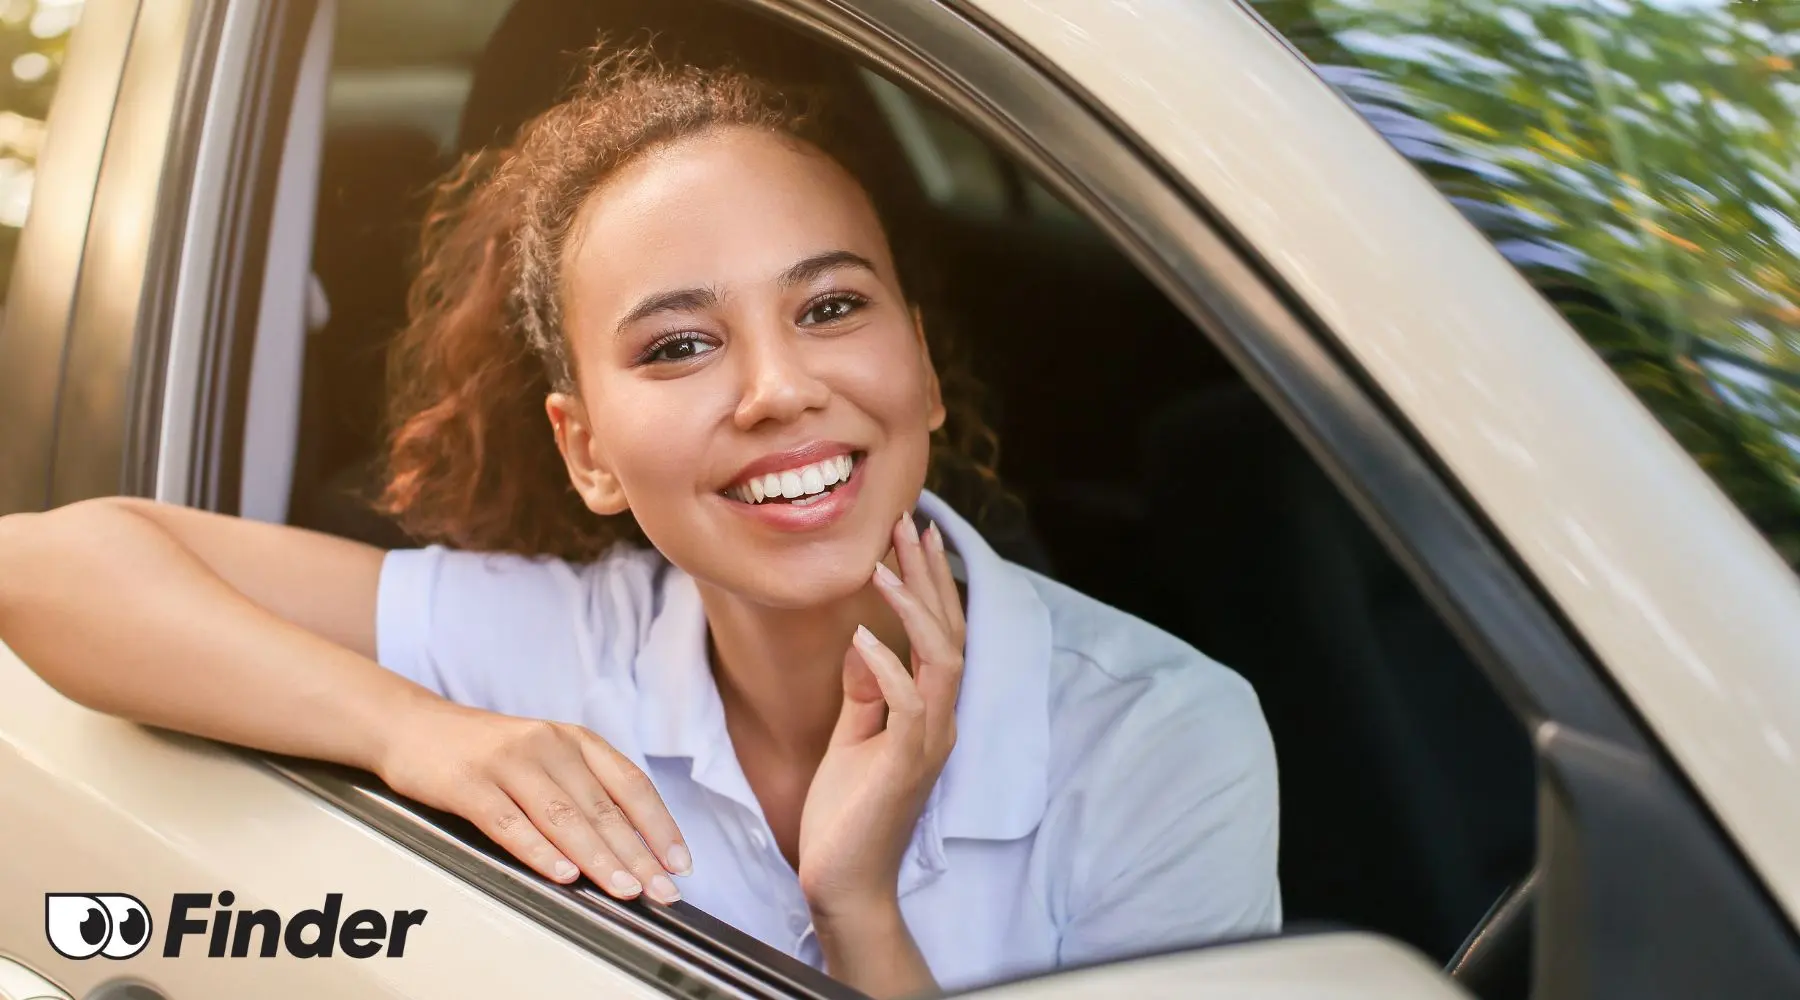 Young_Woman_Driving_Car_New_Logo_Canva_1800x1000